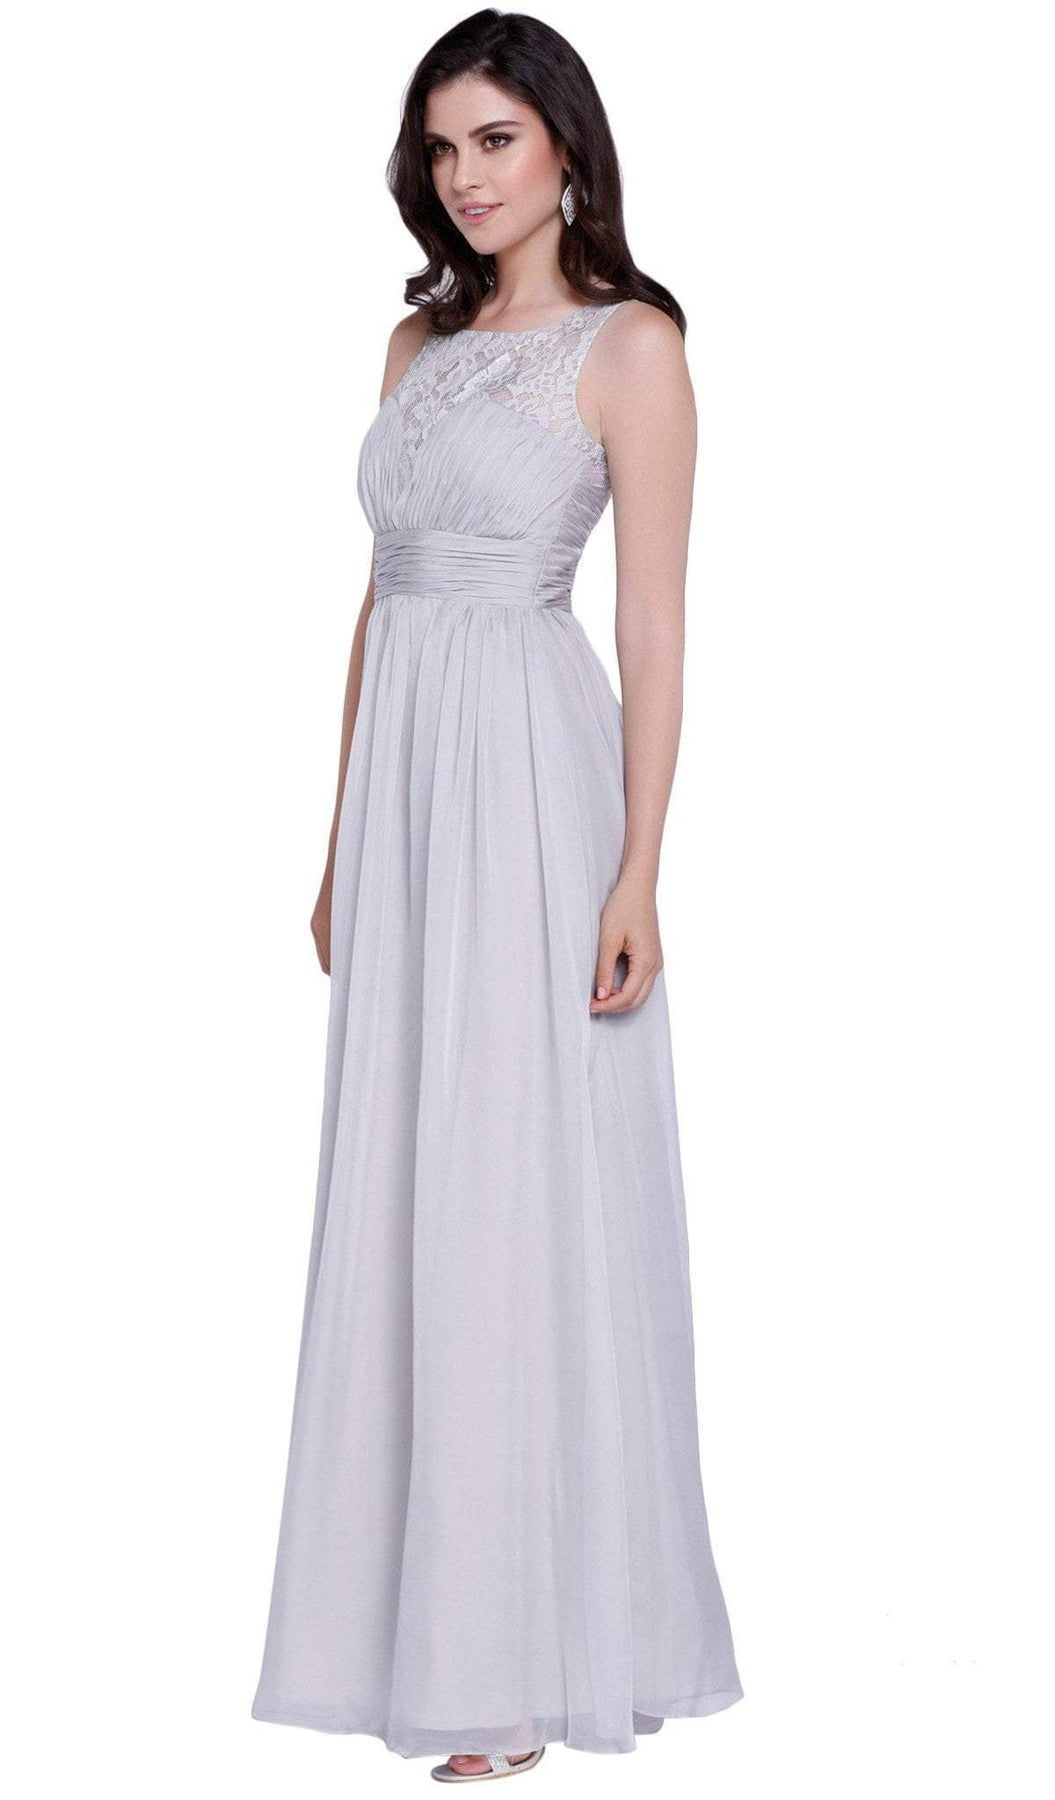 Nox Anabel - 7126 Sleeveless Lace and Chiffon A-Line Evening Dress Special Occasion Dress XS / Silver